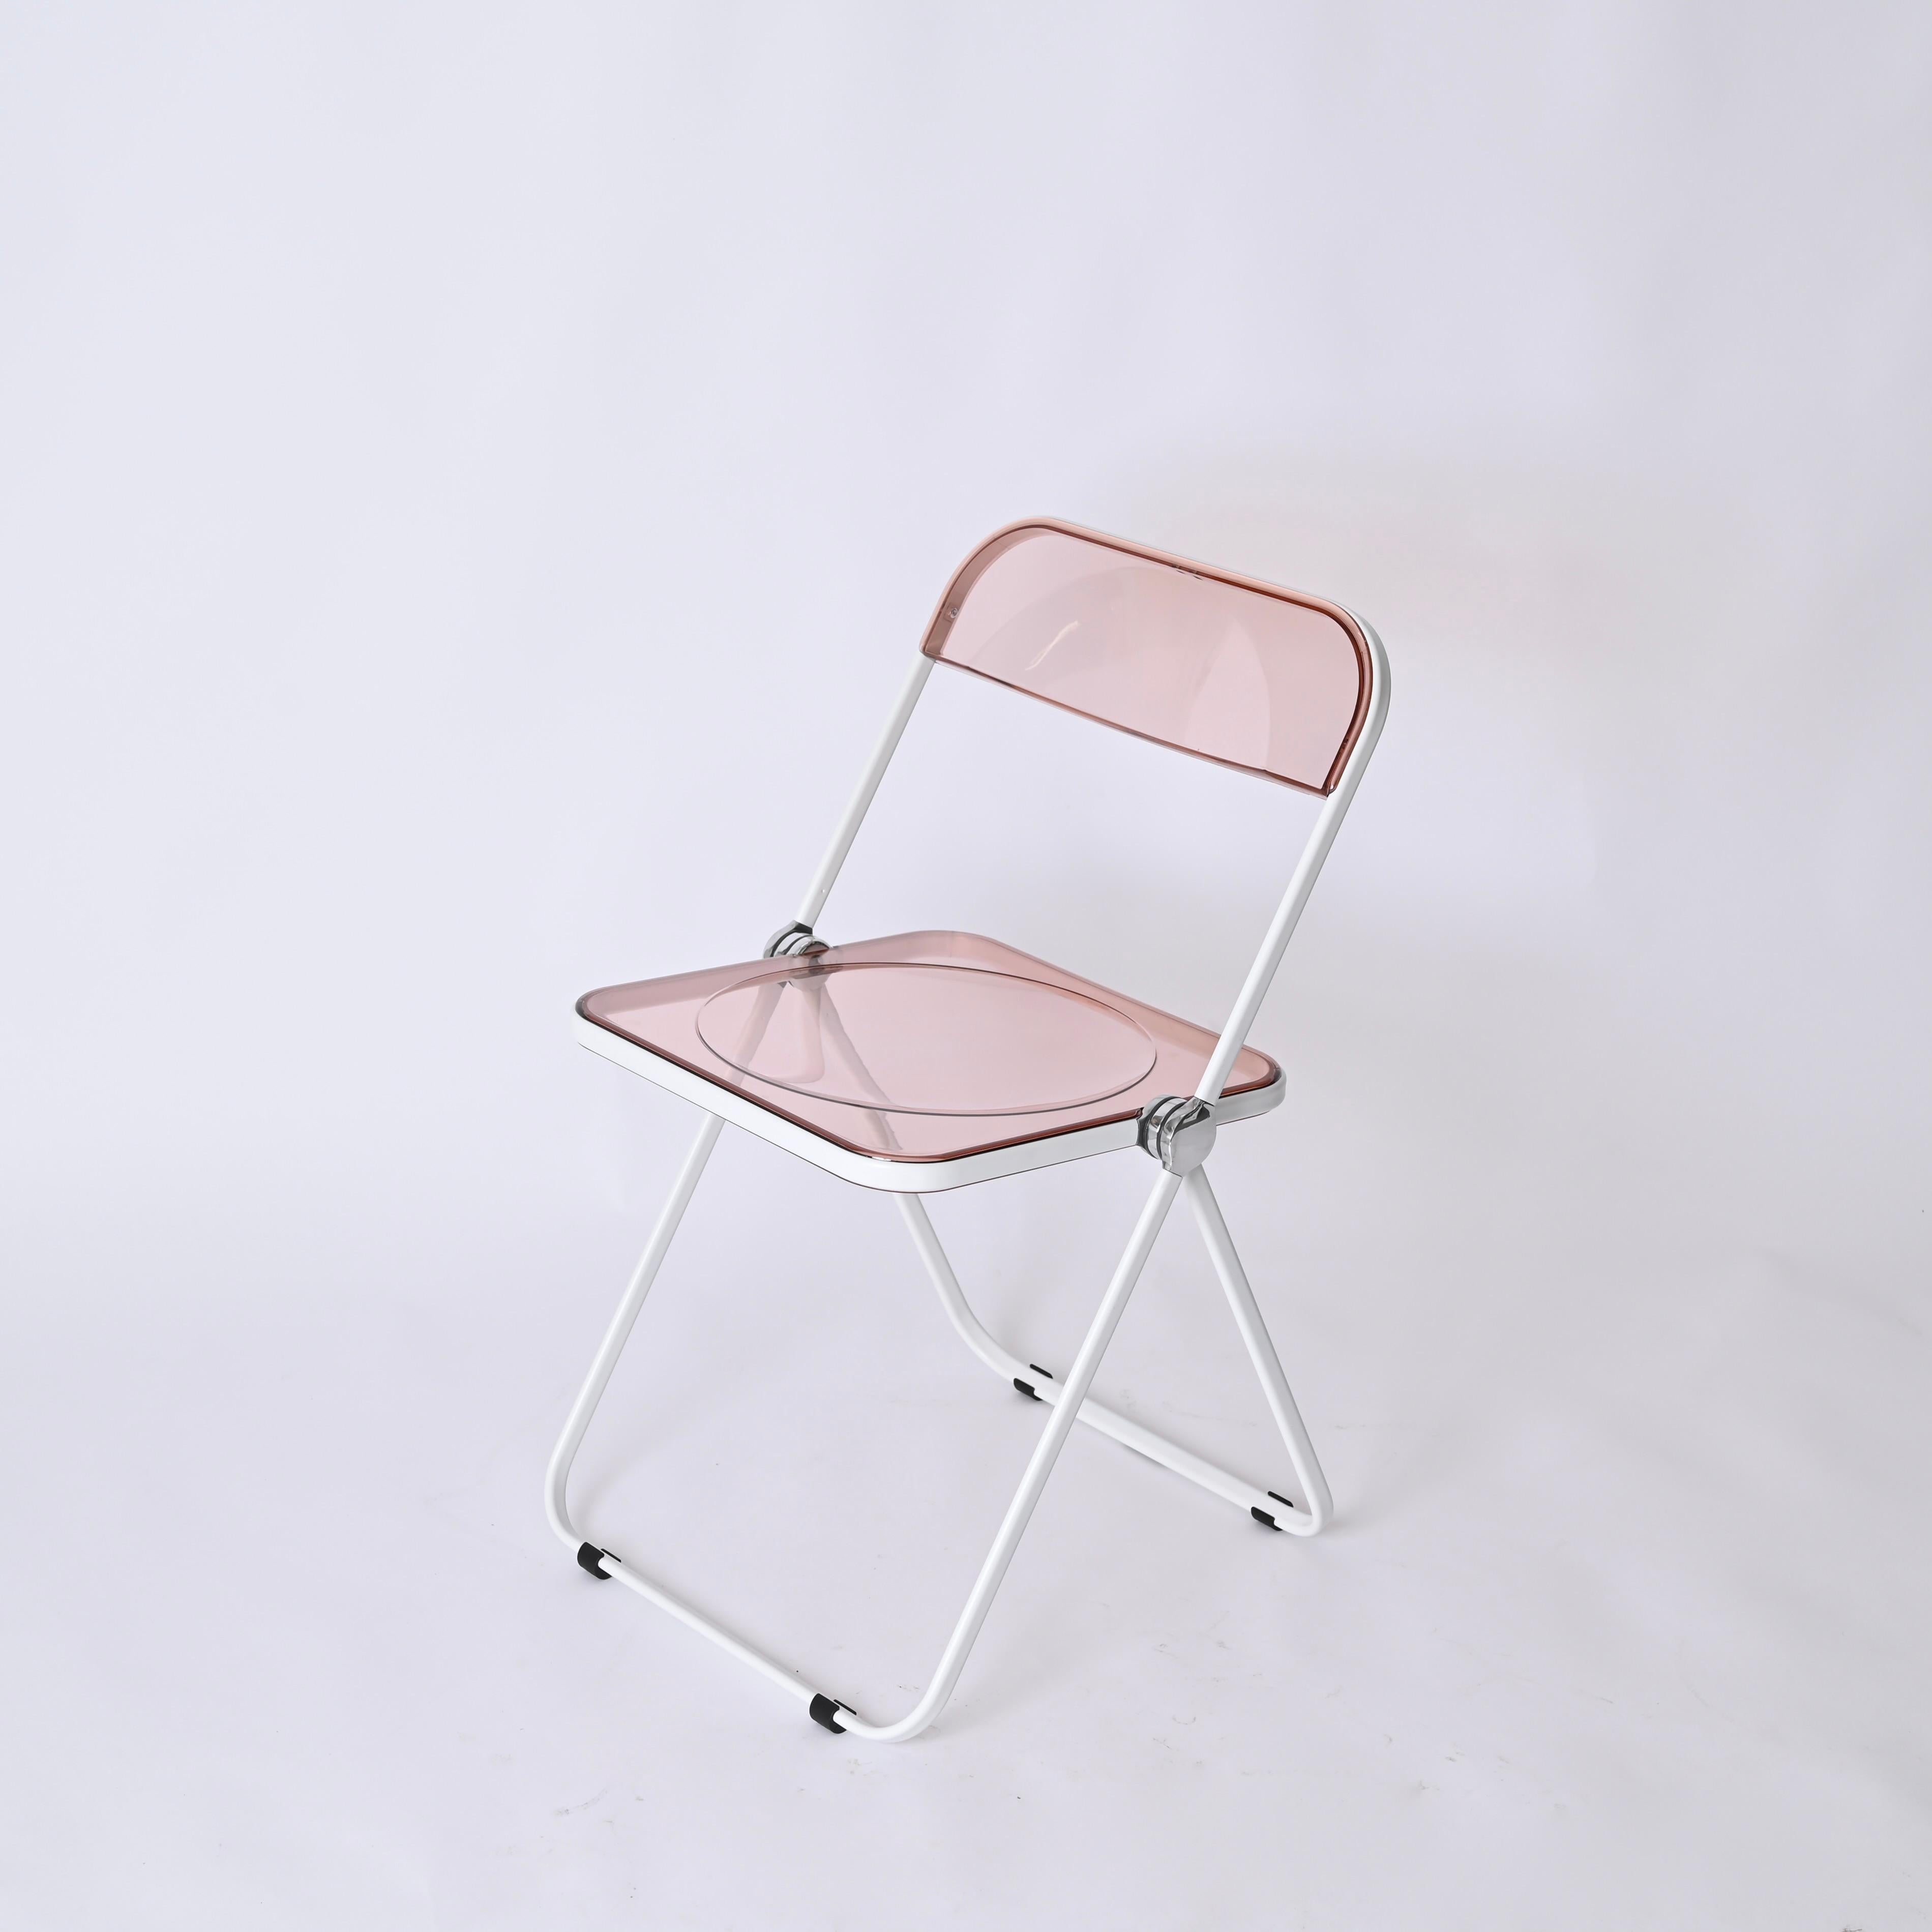 Giancarlo Piretti Lucite Pink and White Folding Plia Chairs for Castelli, 1970s For Sale 7